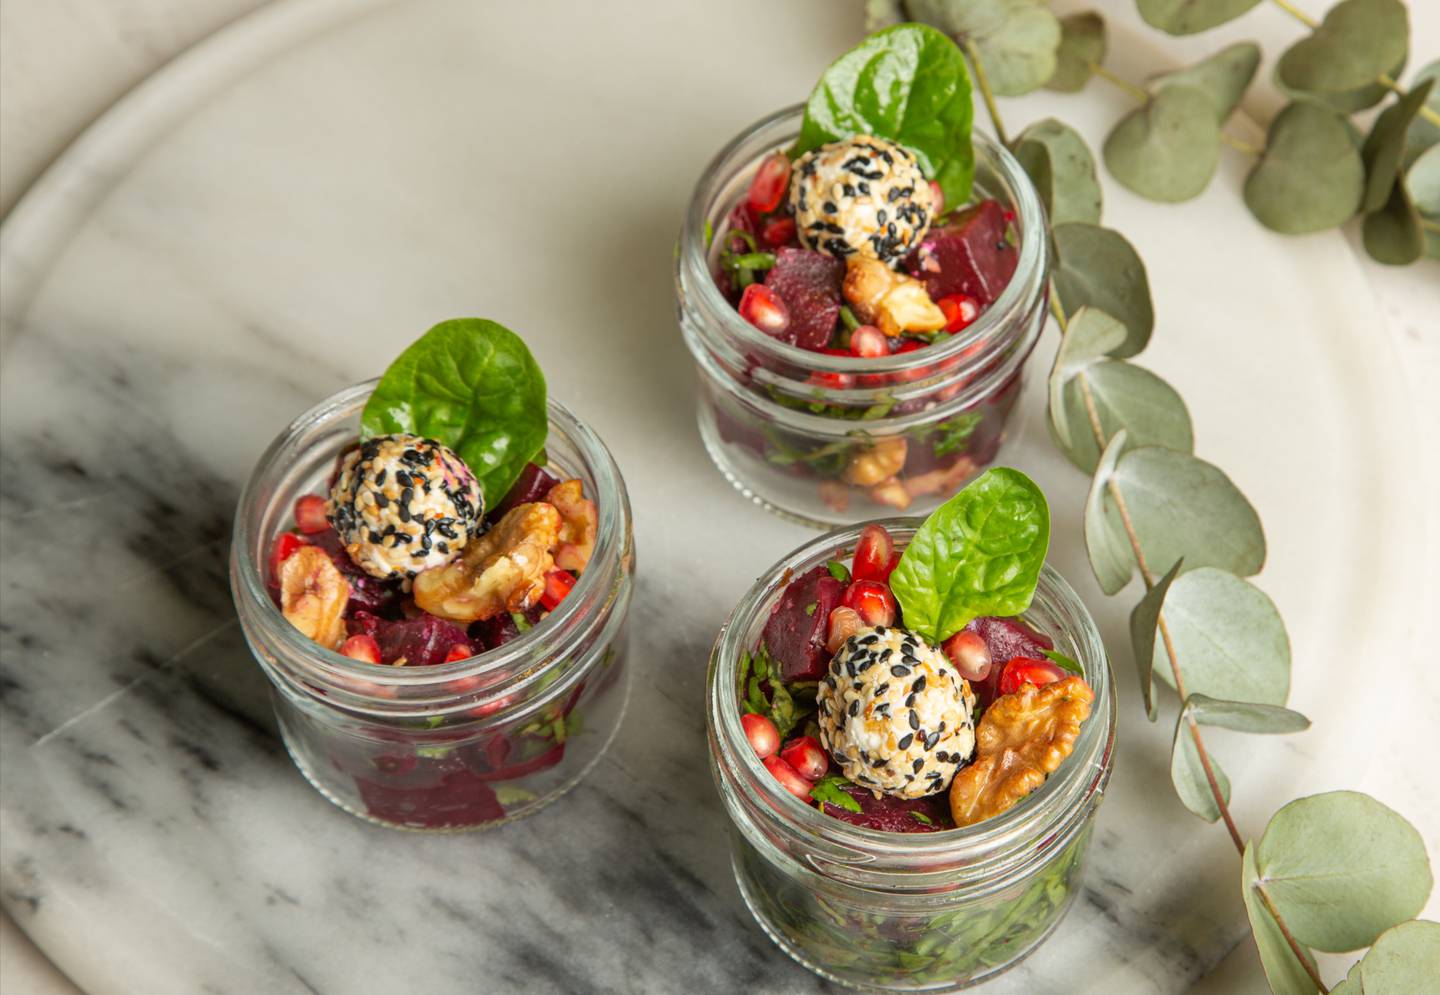 Beetroot goat cheese salad in individual jars, Dh14